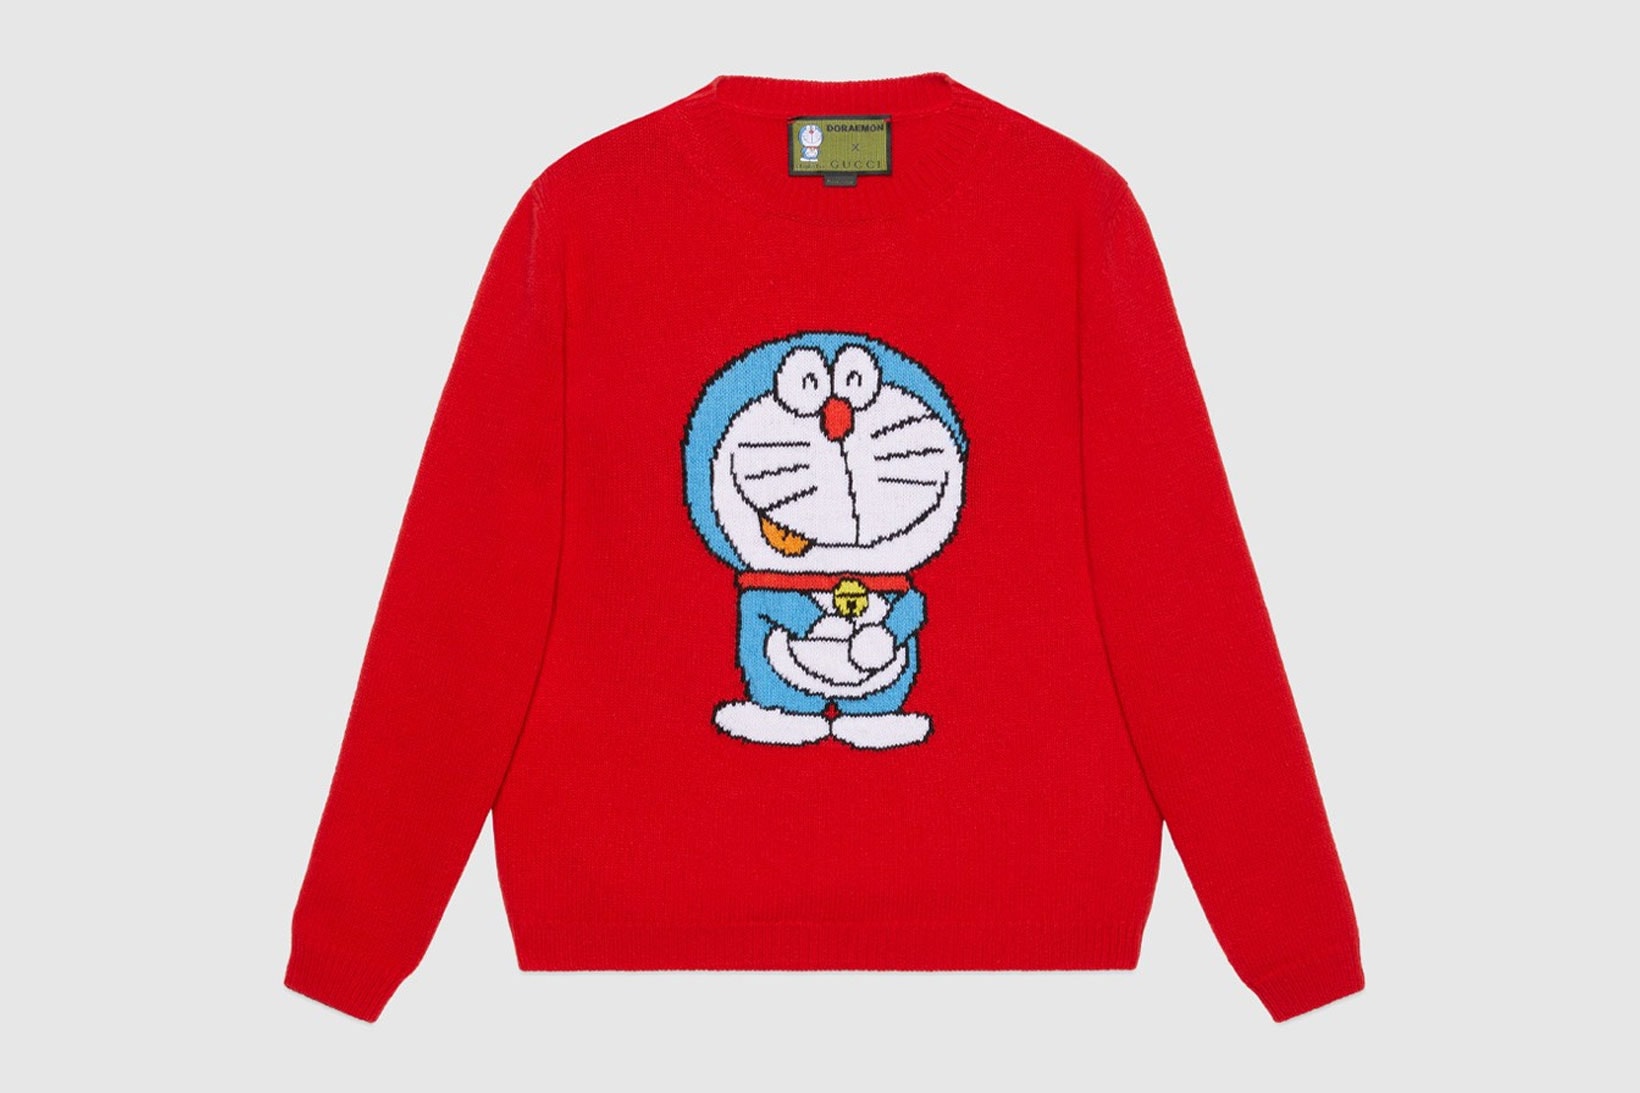 gucci doraemon capsule collaboration collection gg white hoodie red sweater knit